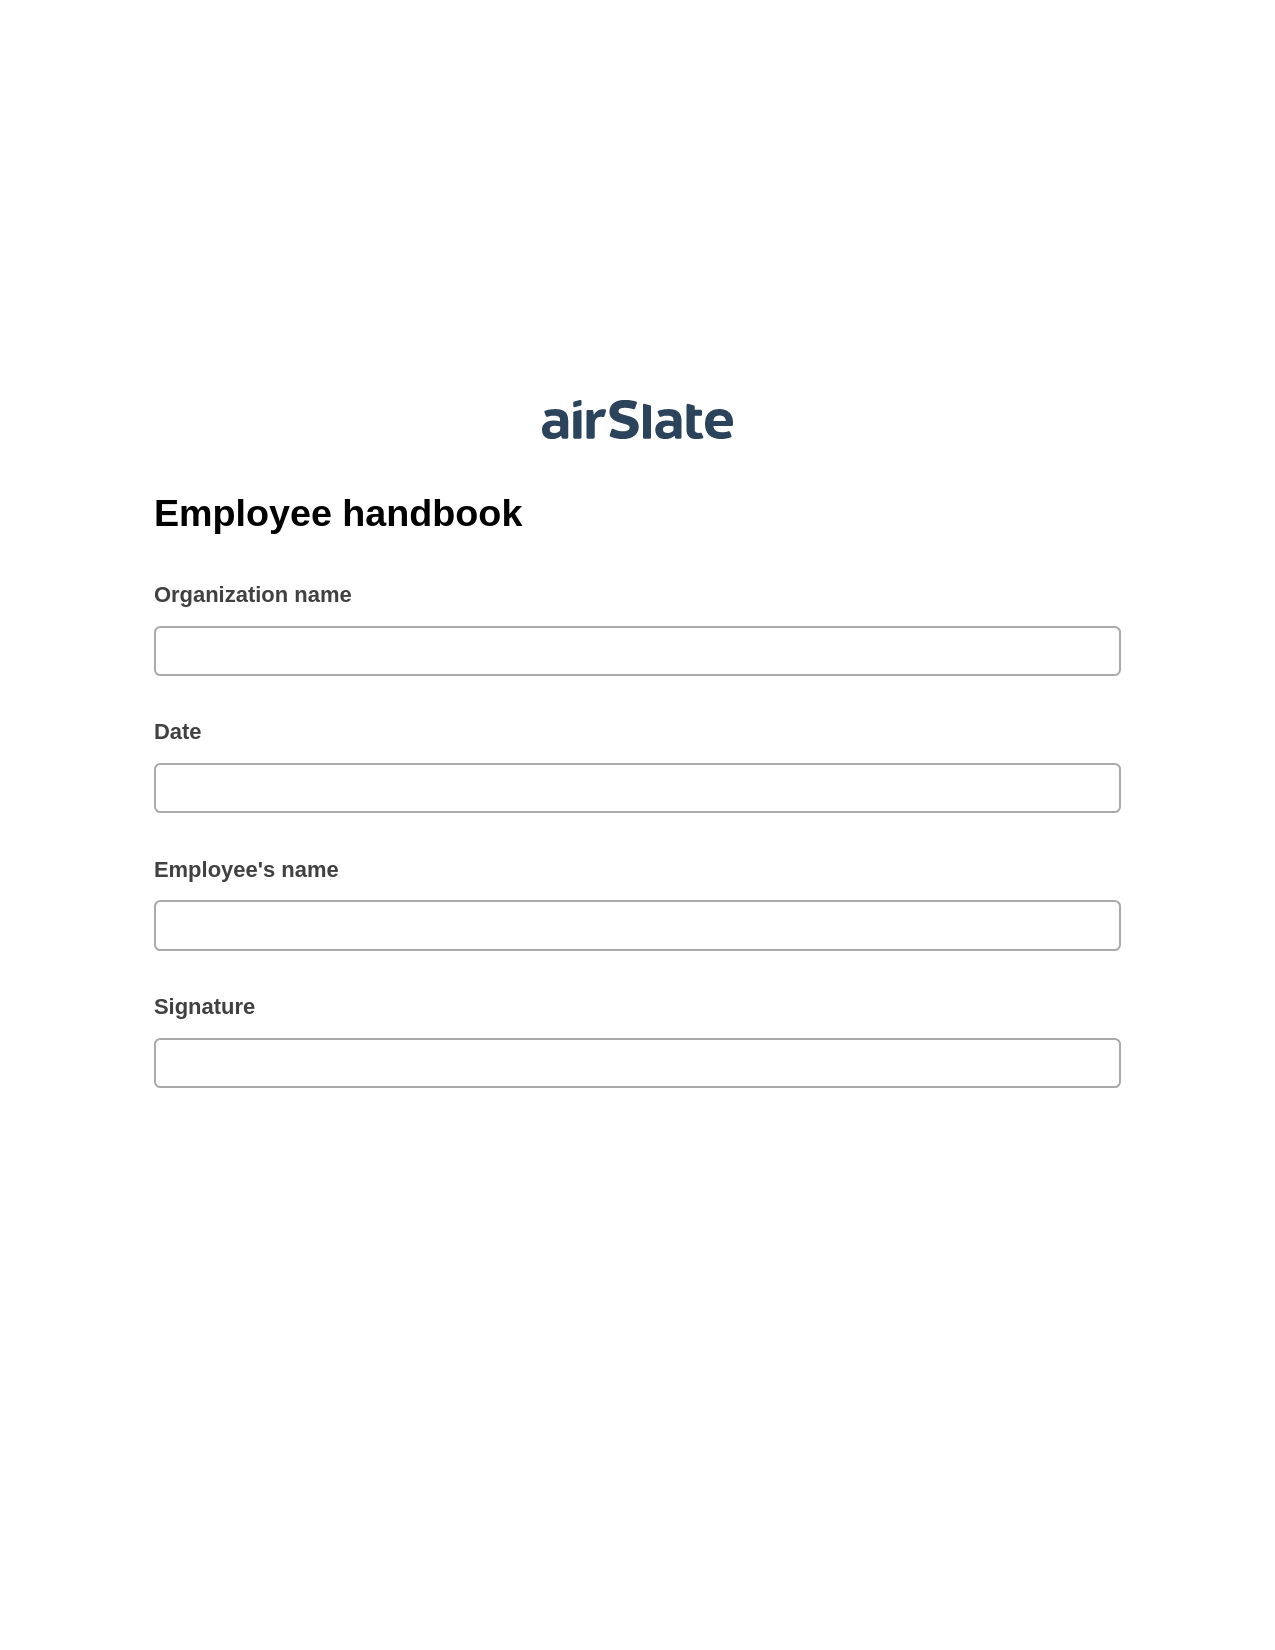 Employee handbook Pre-fill from Excel Spreadsheet Bot, Pre-fill with Custom Data Bot, Archive to SharePoint Folder Bot